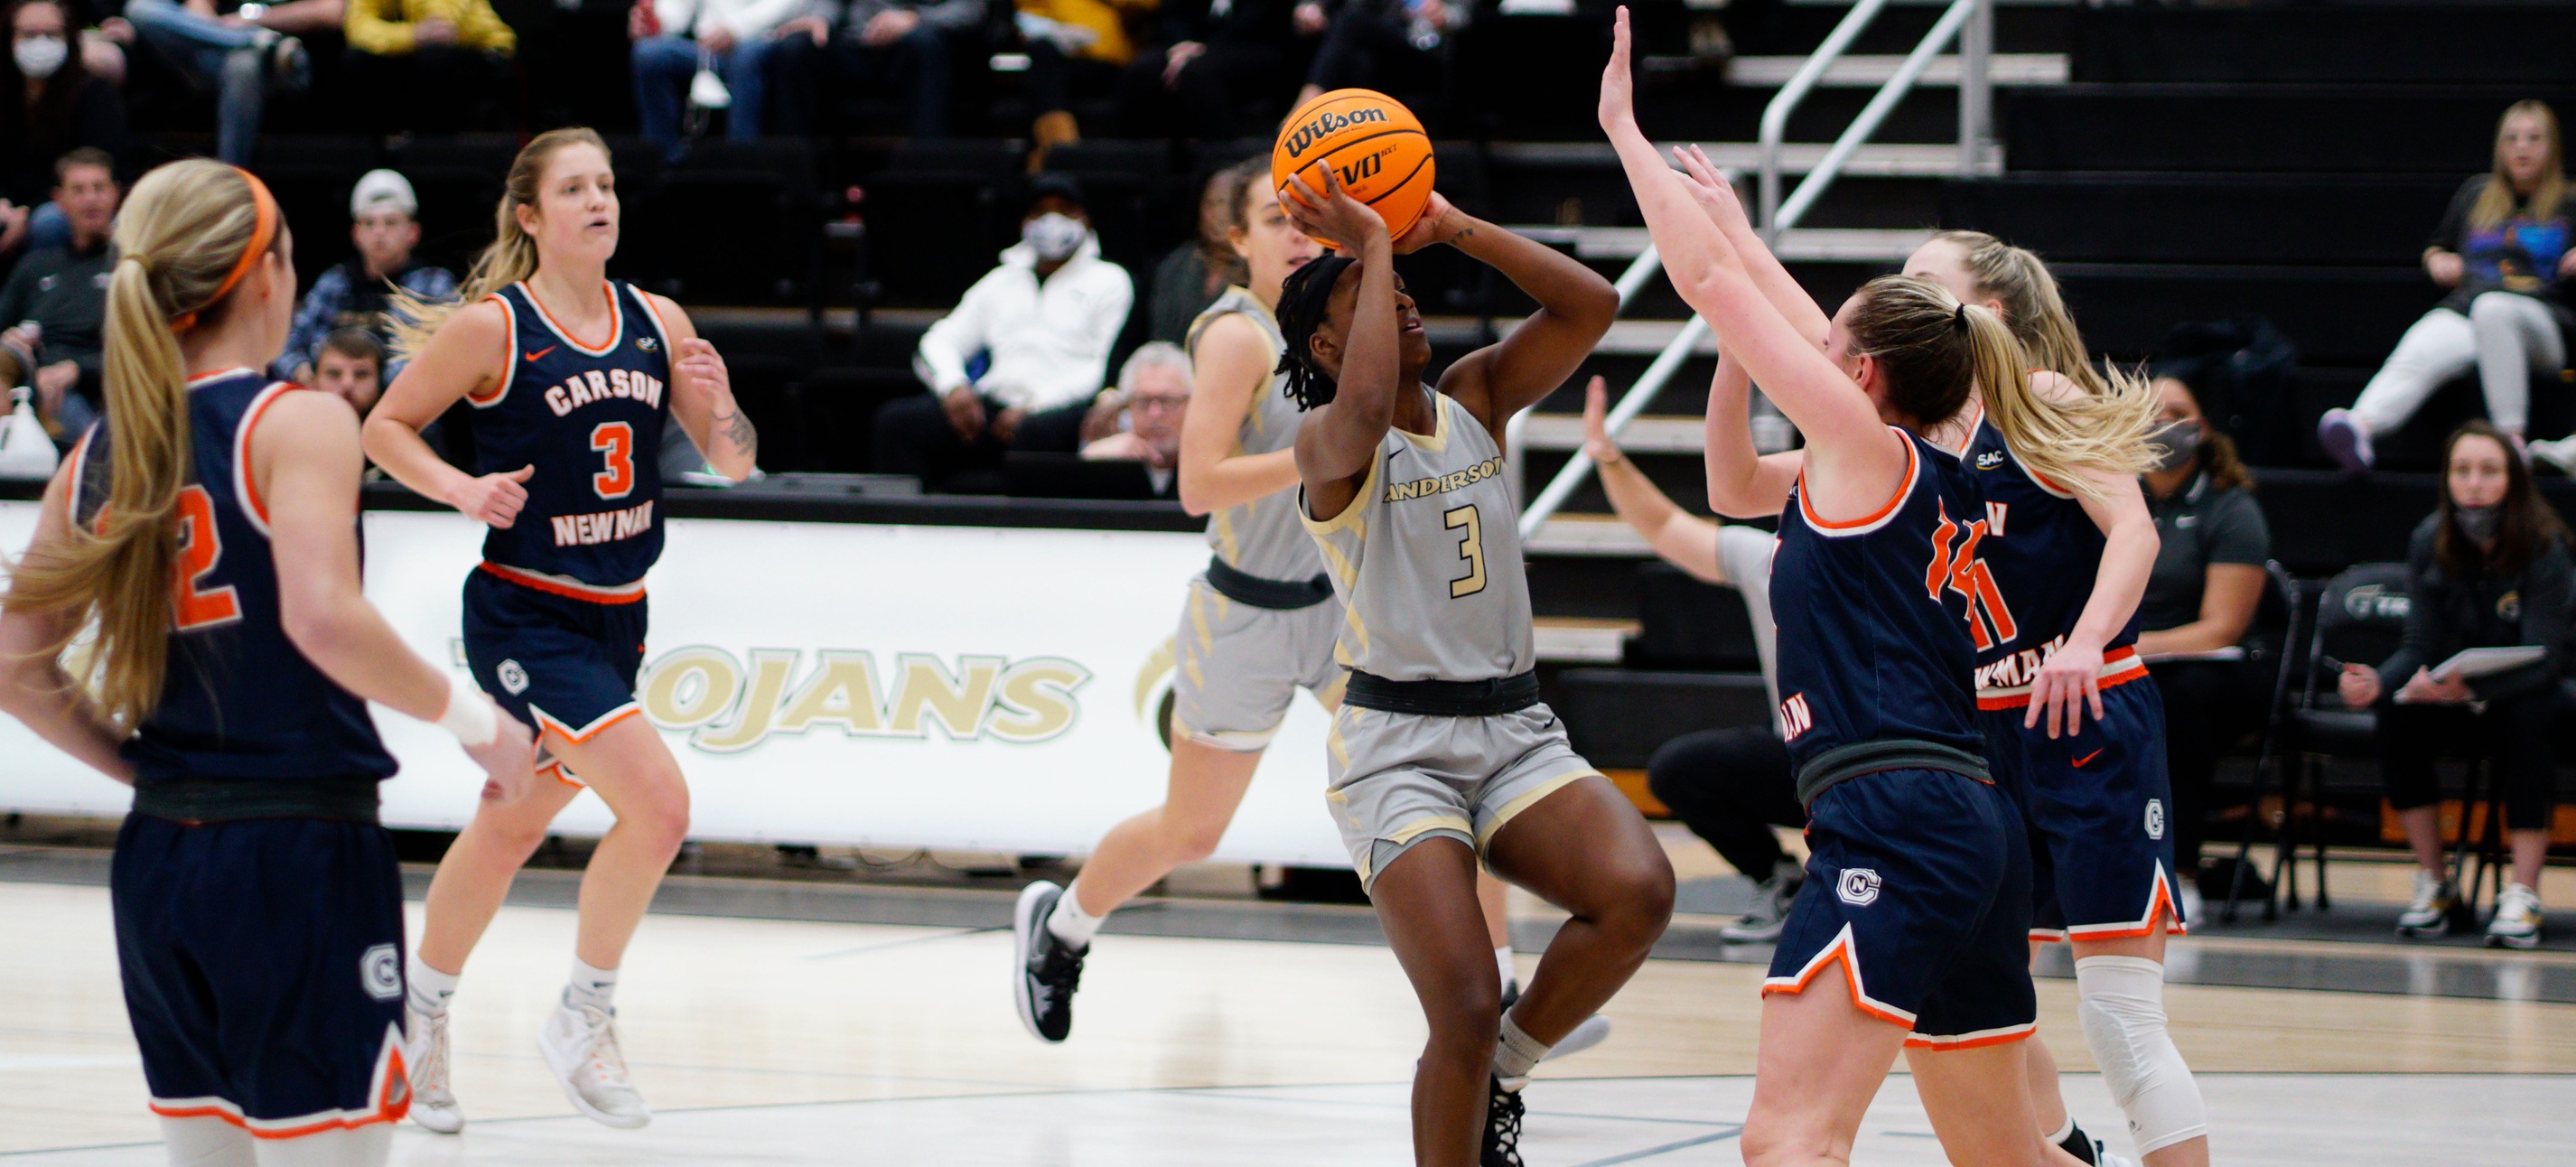 Scoring Drought Down The Stretch Proves Costly For Trojans In Loss Versus Carson-Newman: 67-64